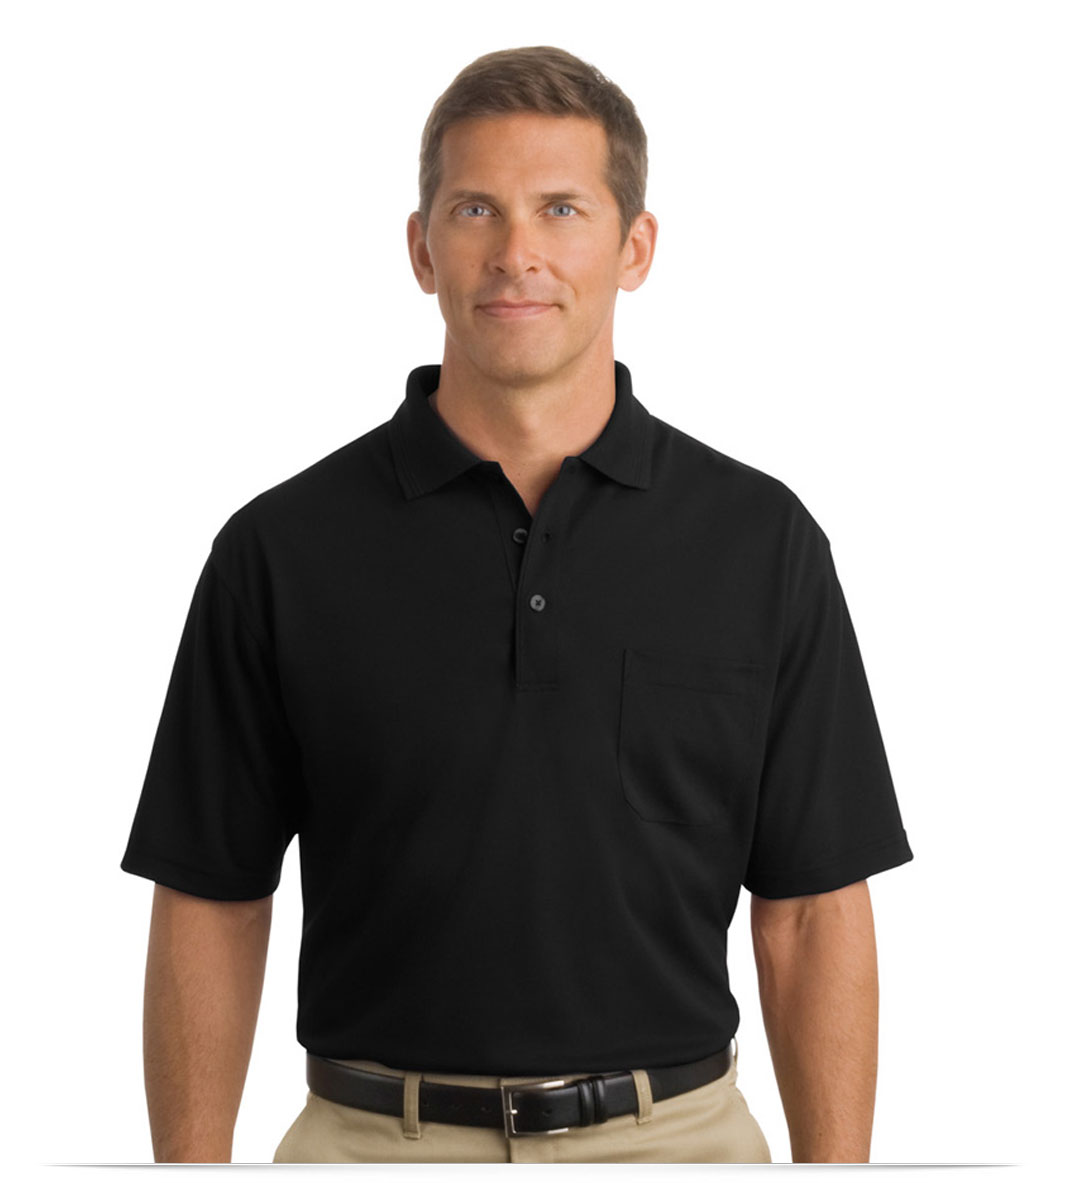 Embroidered Industrial Custom Polo Shirt with Pocket